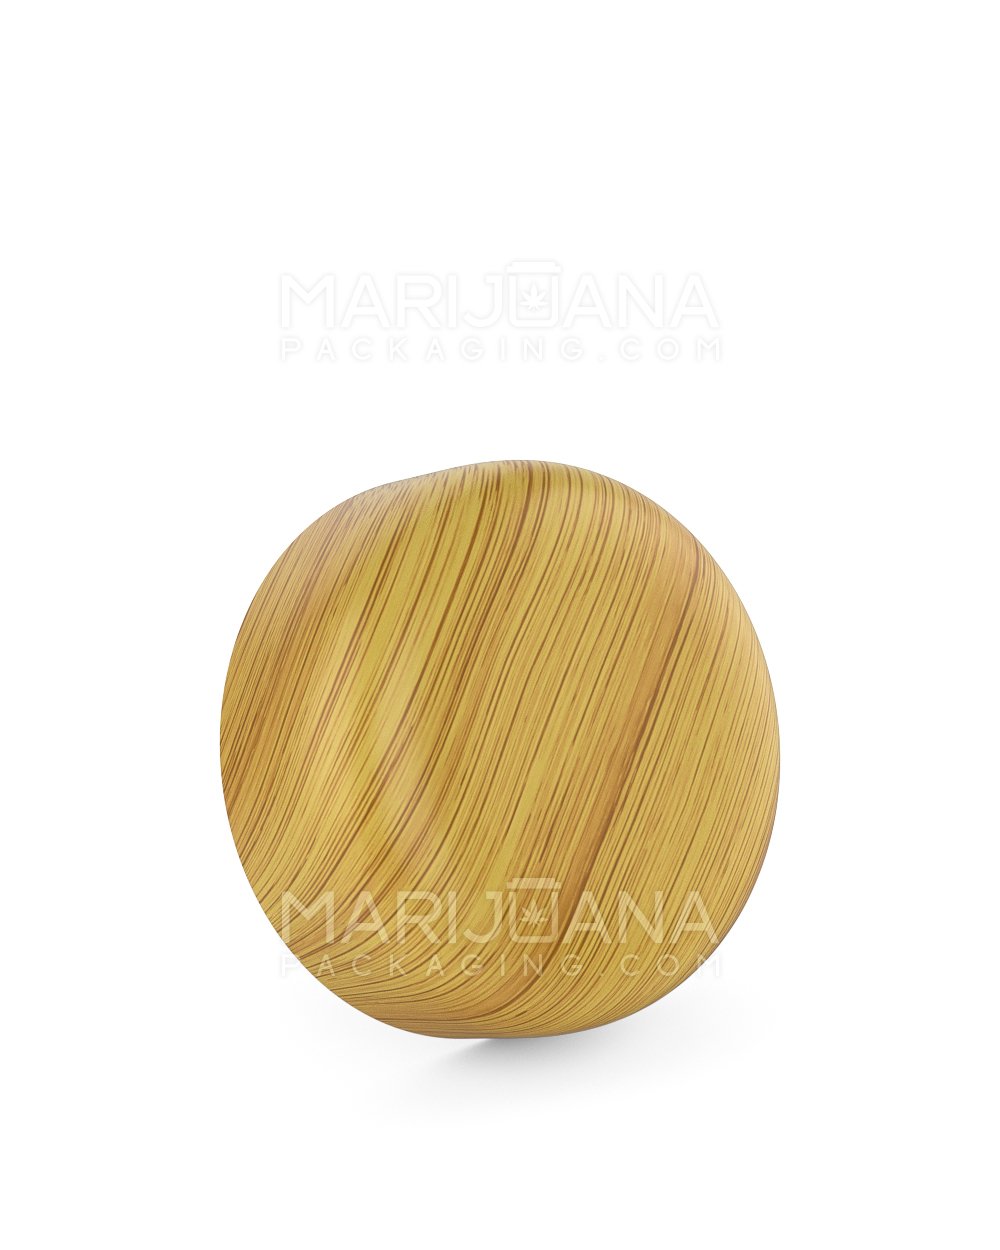 Child Resistant Dome Push Down & Turn Plastic Caps | 53mm - Bamboo Wood | Sample - 1